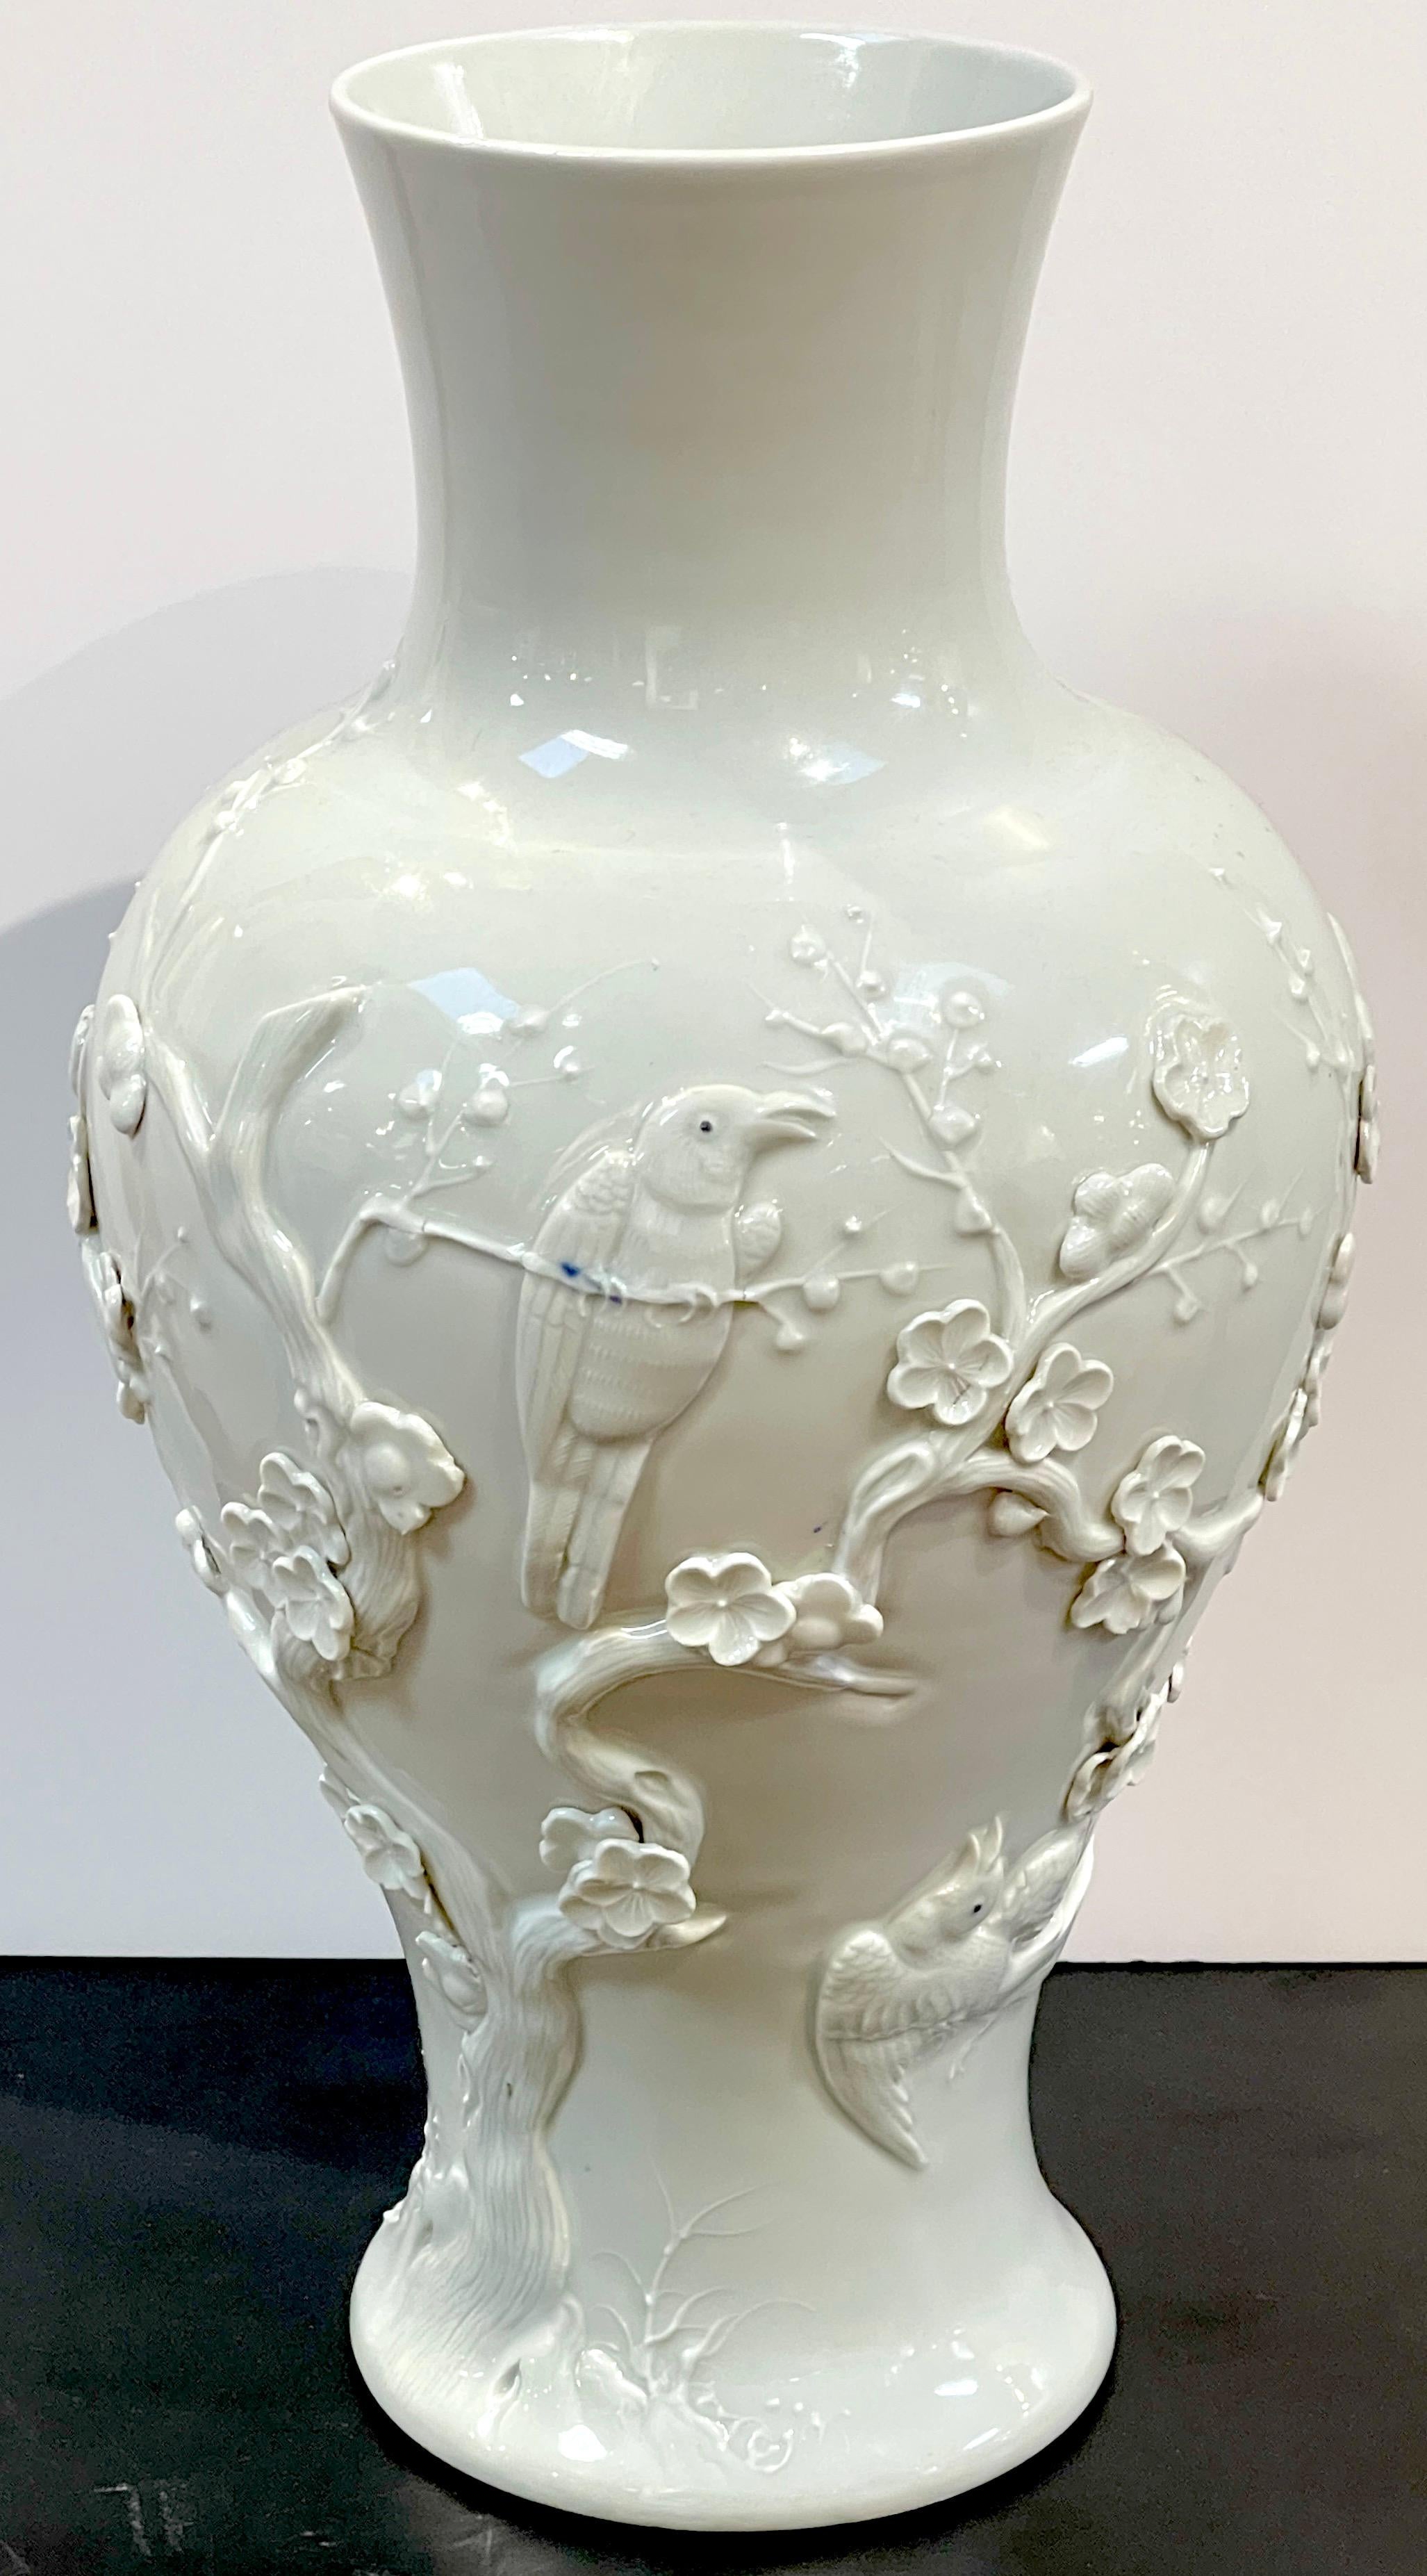 Chinese Export Blanc de Chine Prunus & Bird Motif Relief Vase, Slender 
China, 20th Century,  Incised honorific Jiaqing four-character mark 

Enhance your interior with this exquisite Chinese Export Blanc de Chine Prunus & Bird Motif Relief Vase, a